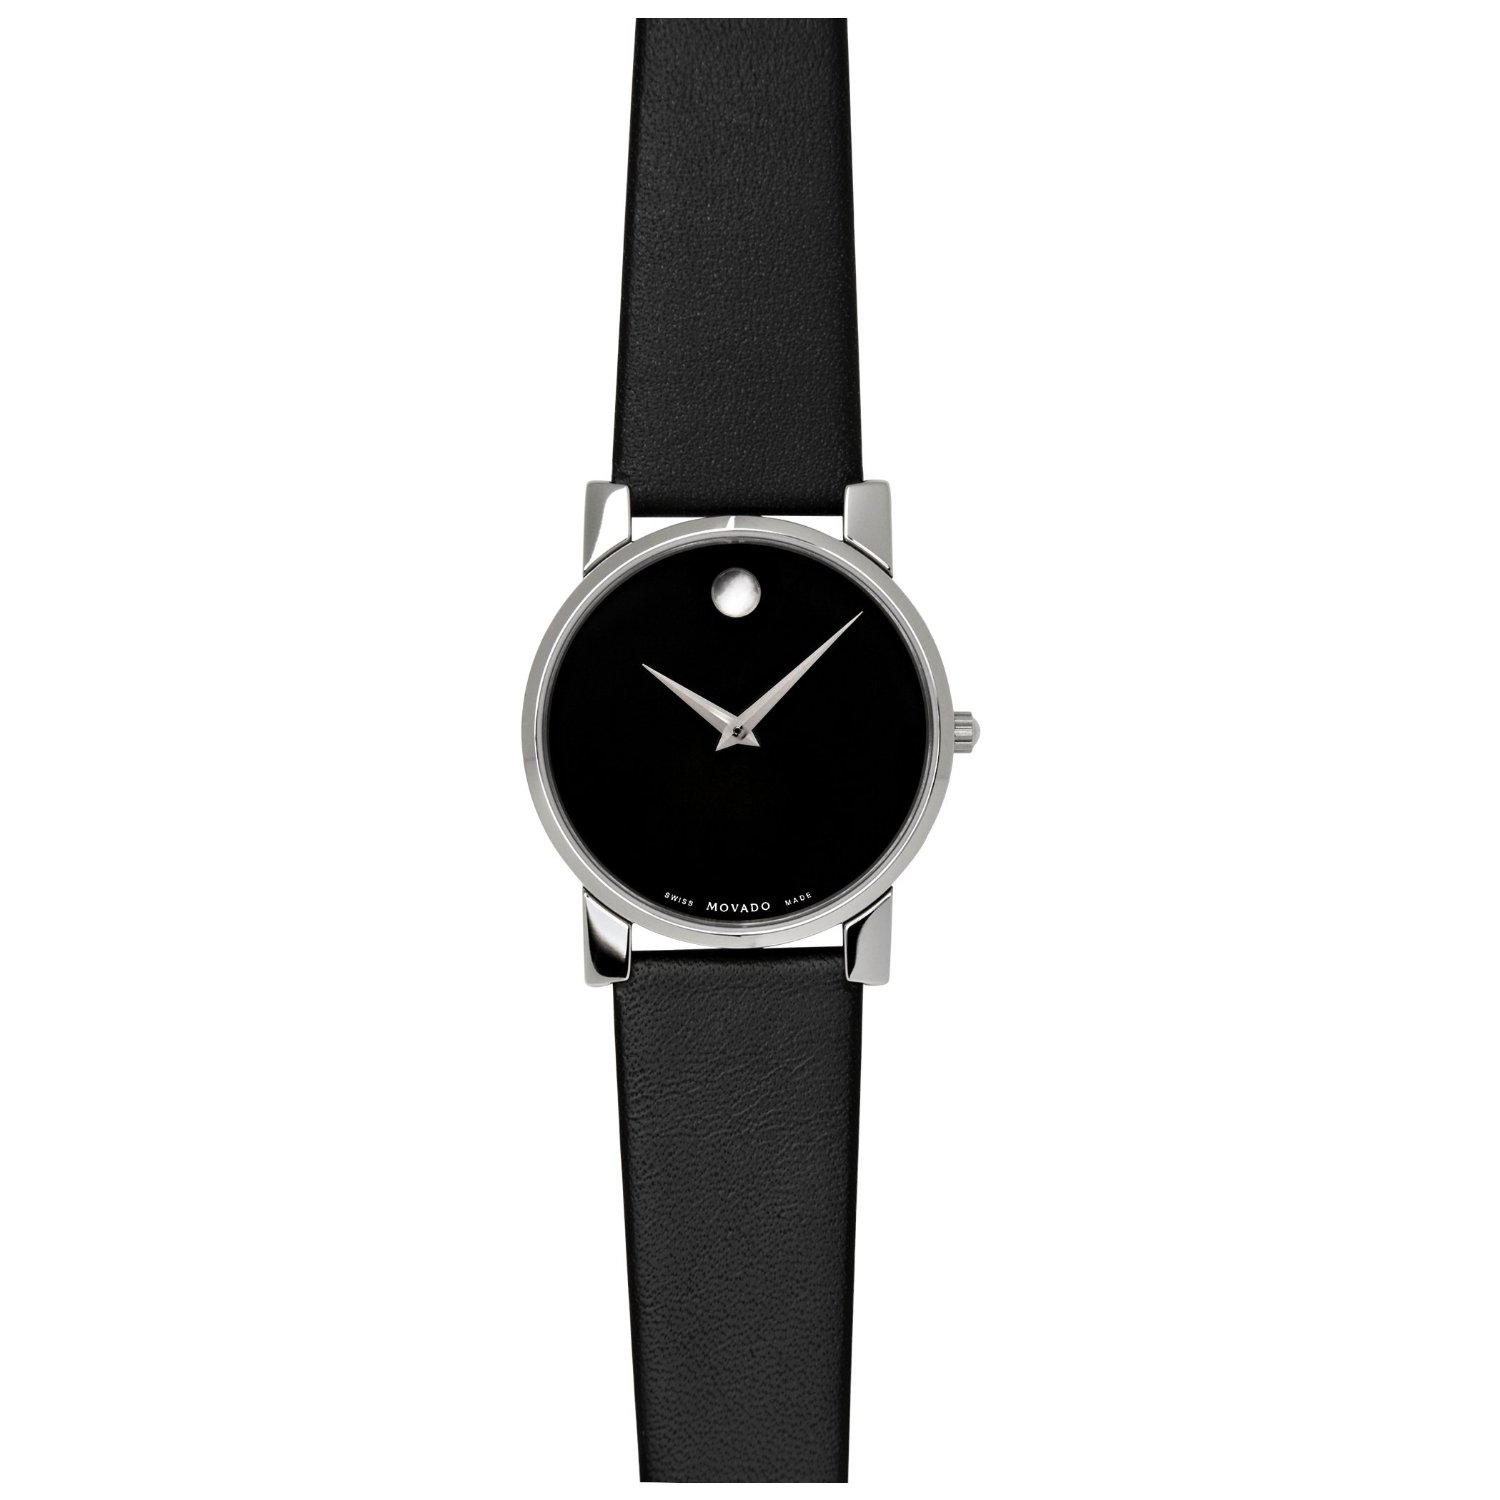 This watch has 40 reviews with an average rating of 4.5 stars on ...